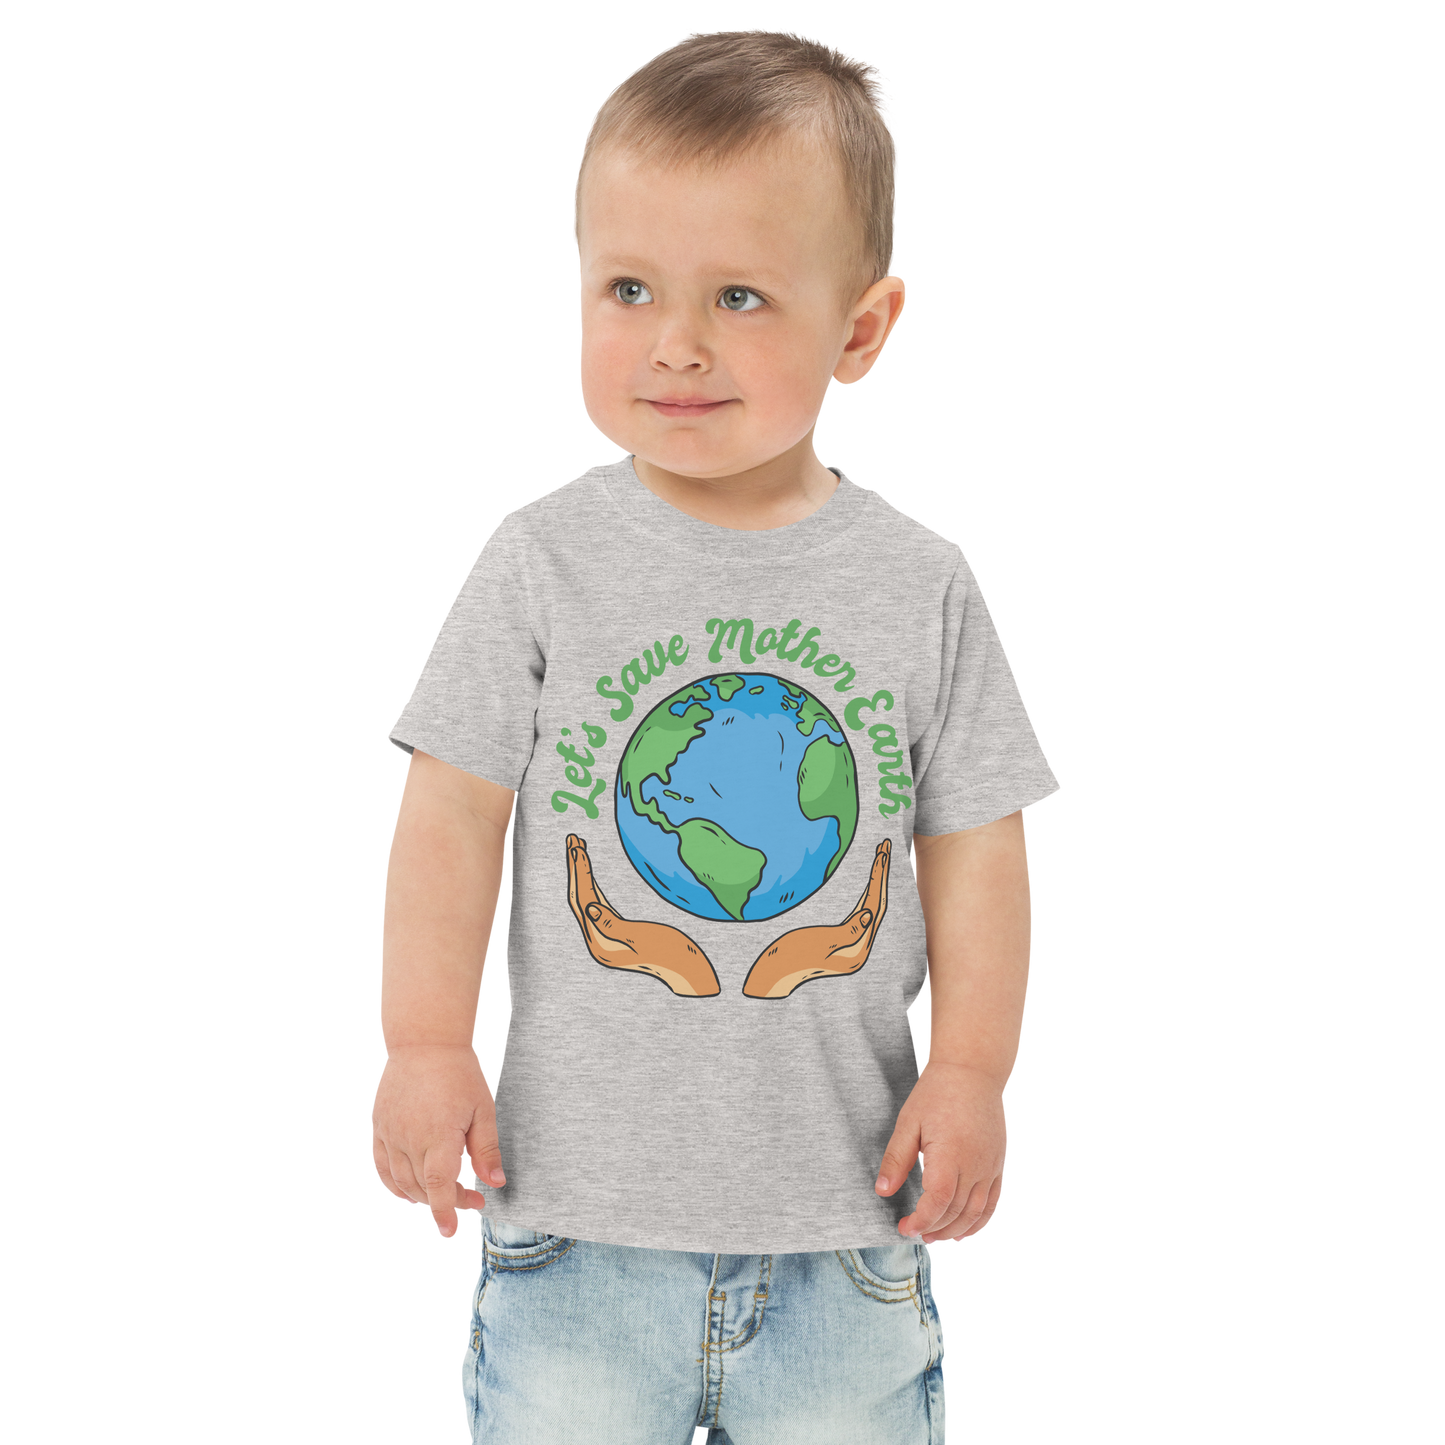 Hands holding planet earth | Toddler jersey t-shirt